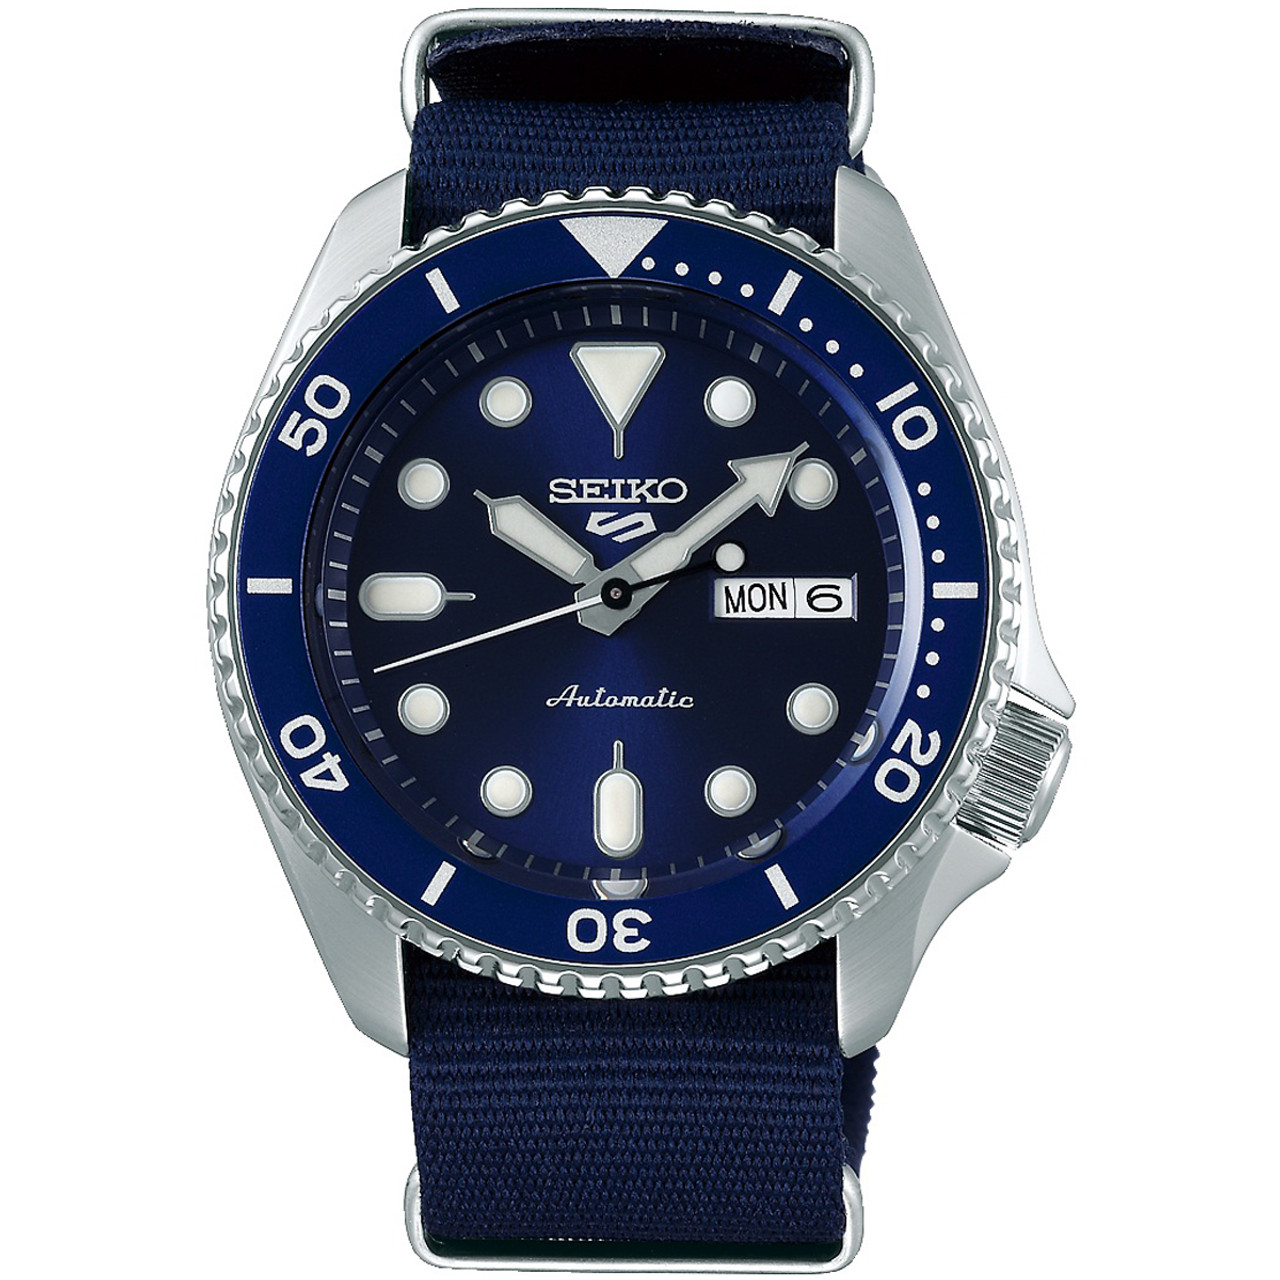 Seiko 5 Sports Automatic Blue Dial Watch SRPD51K2